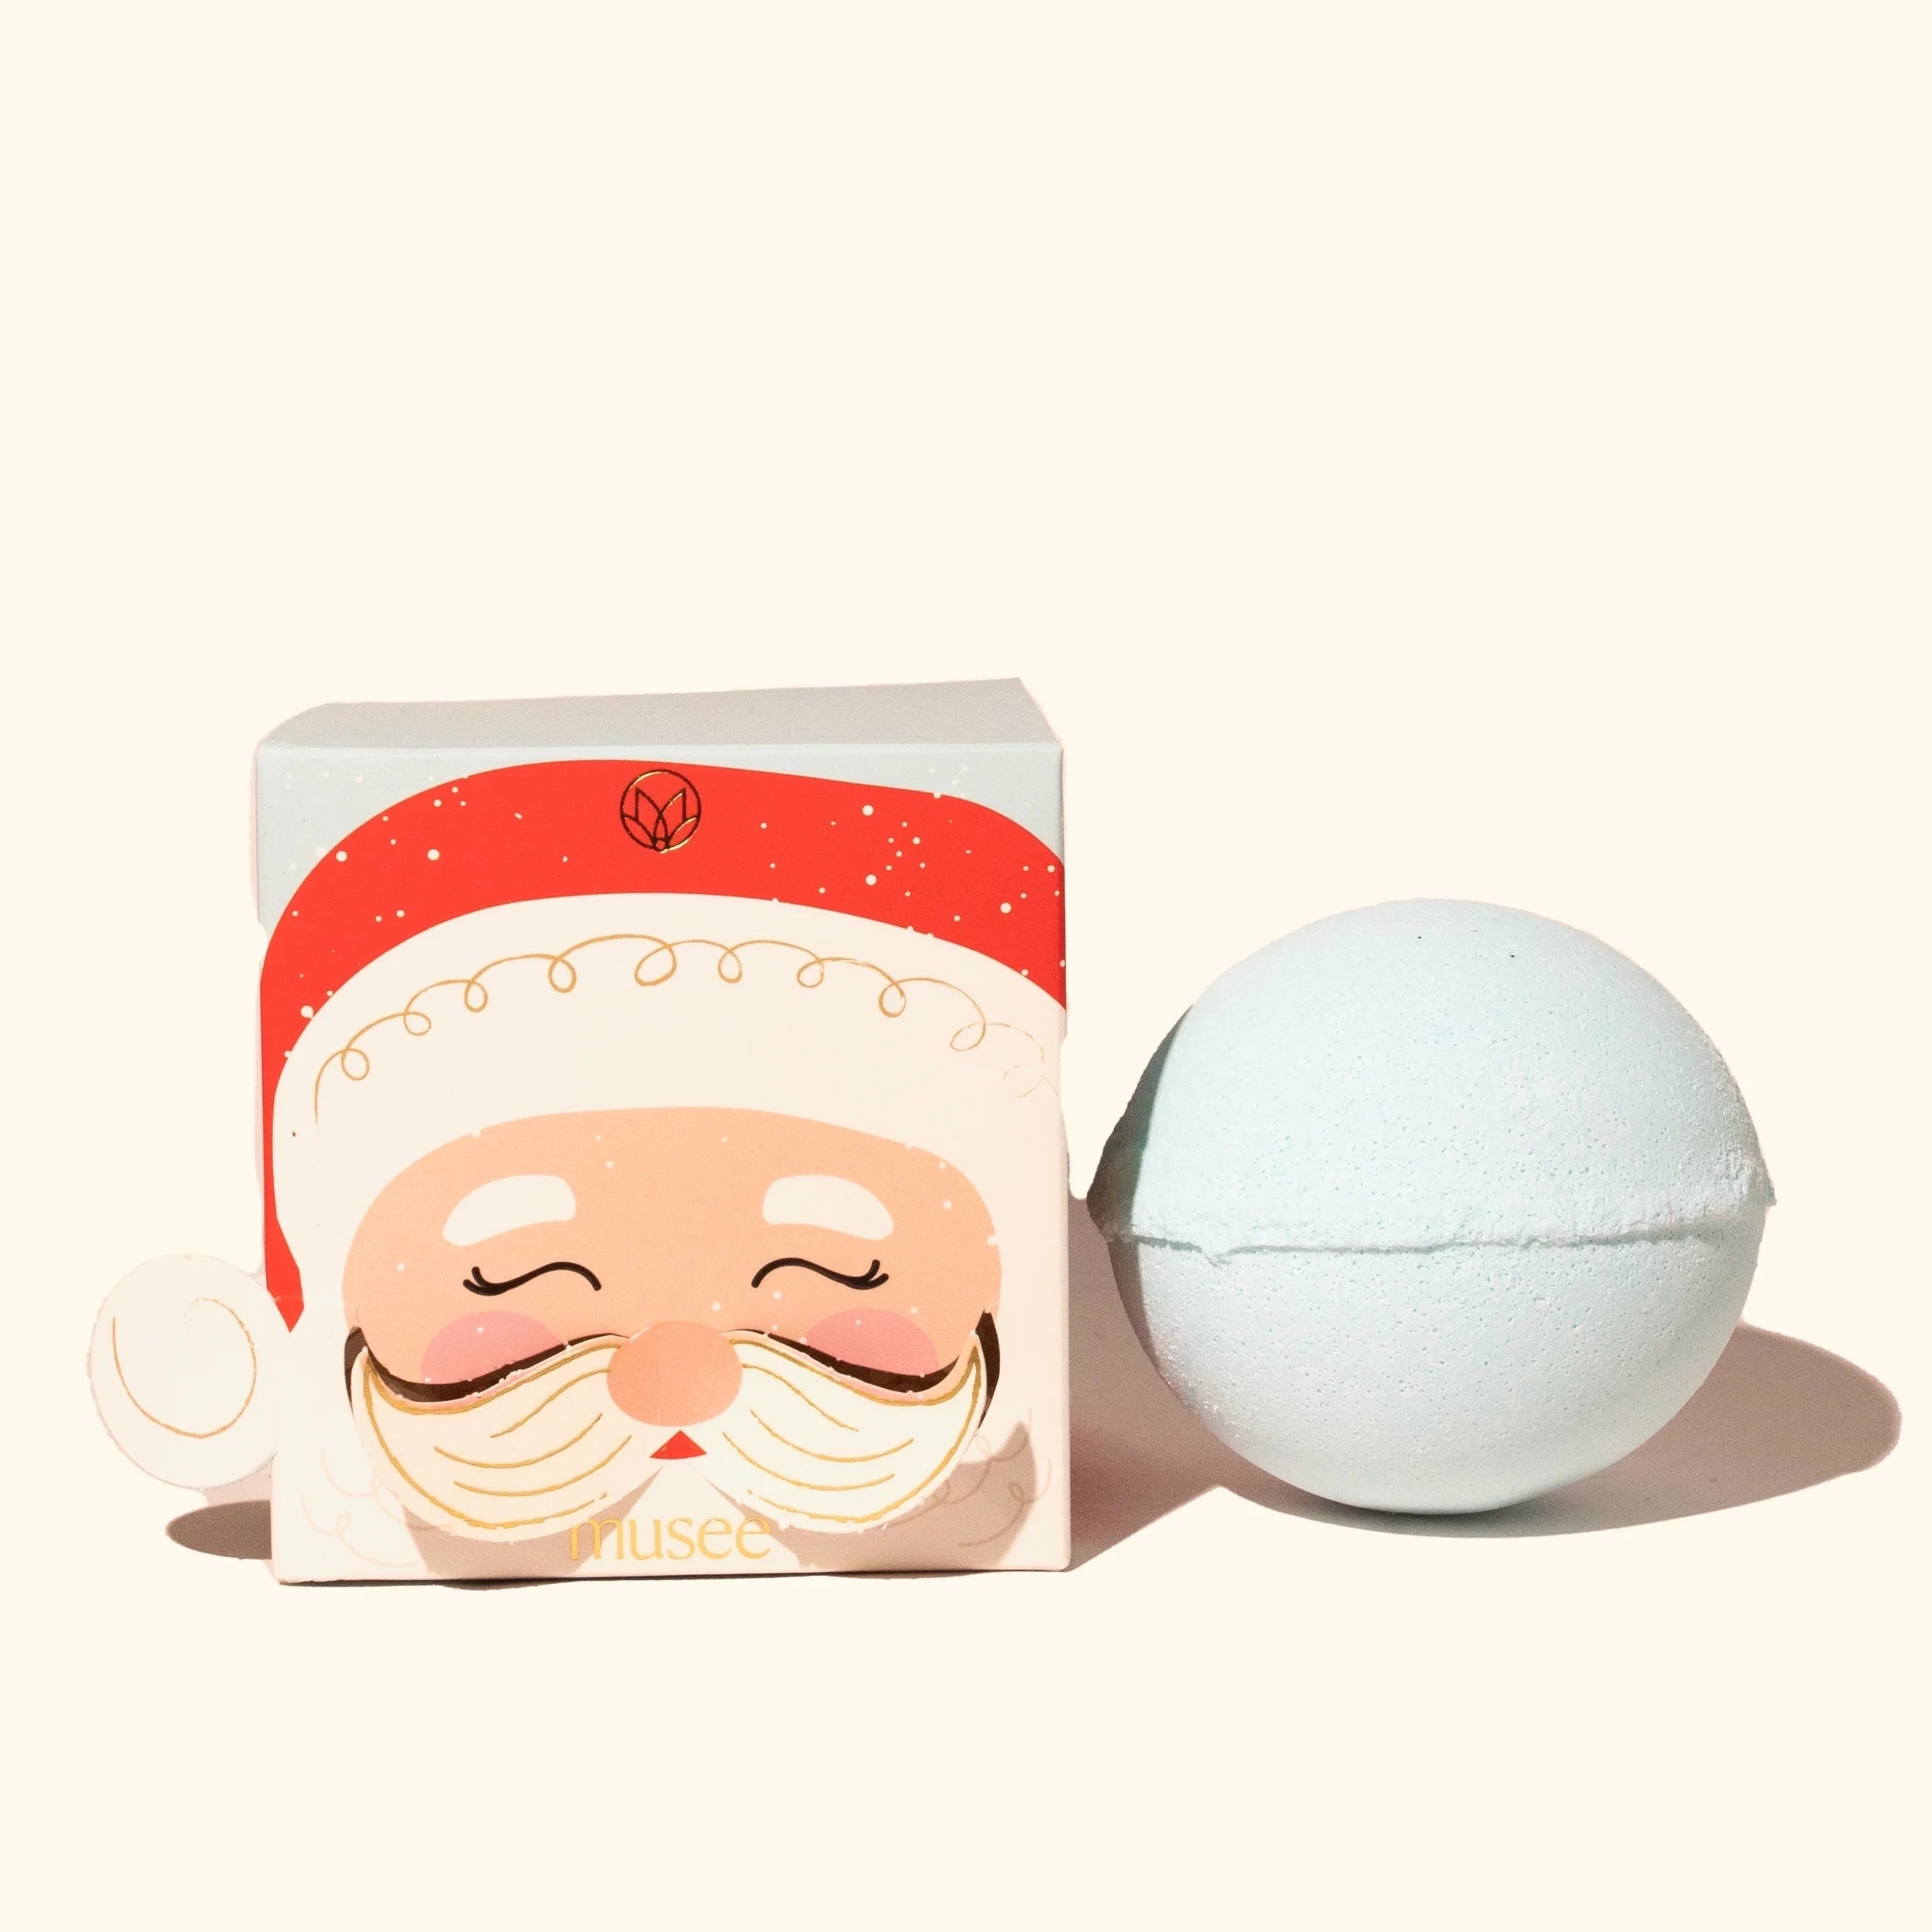 Blue bath bomb outside of box. Box is light blue with a Santa face on the cover